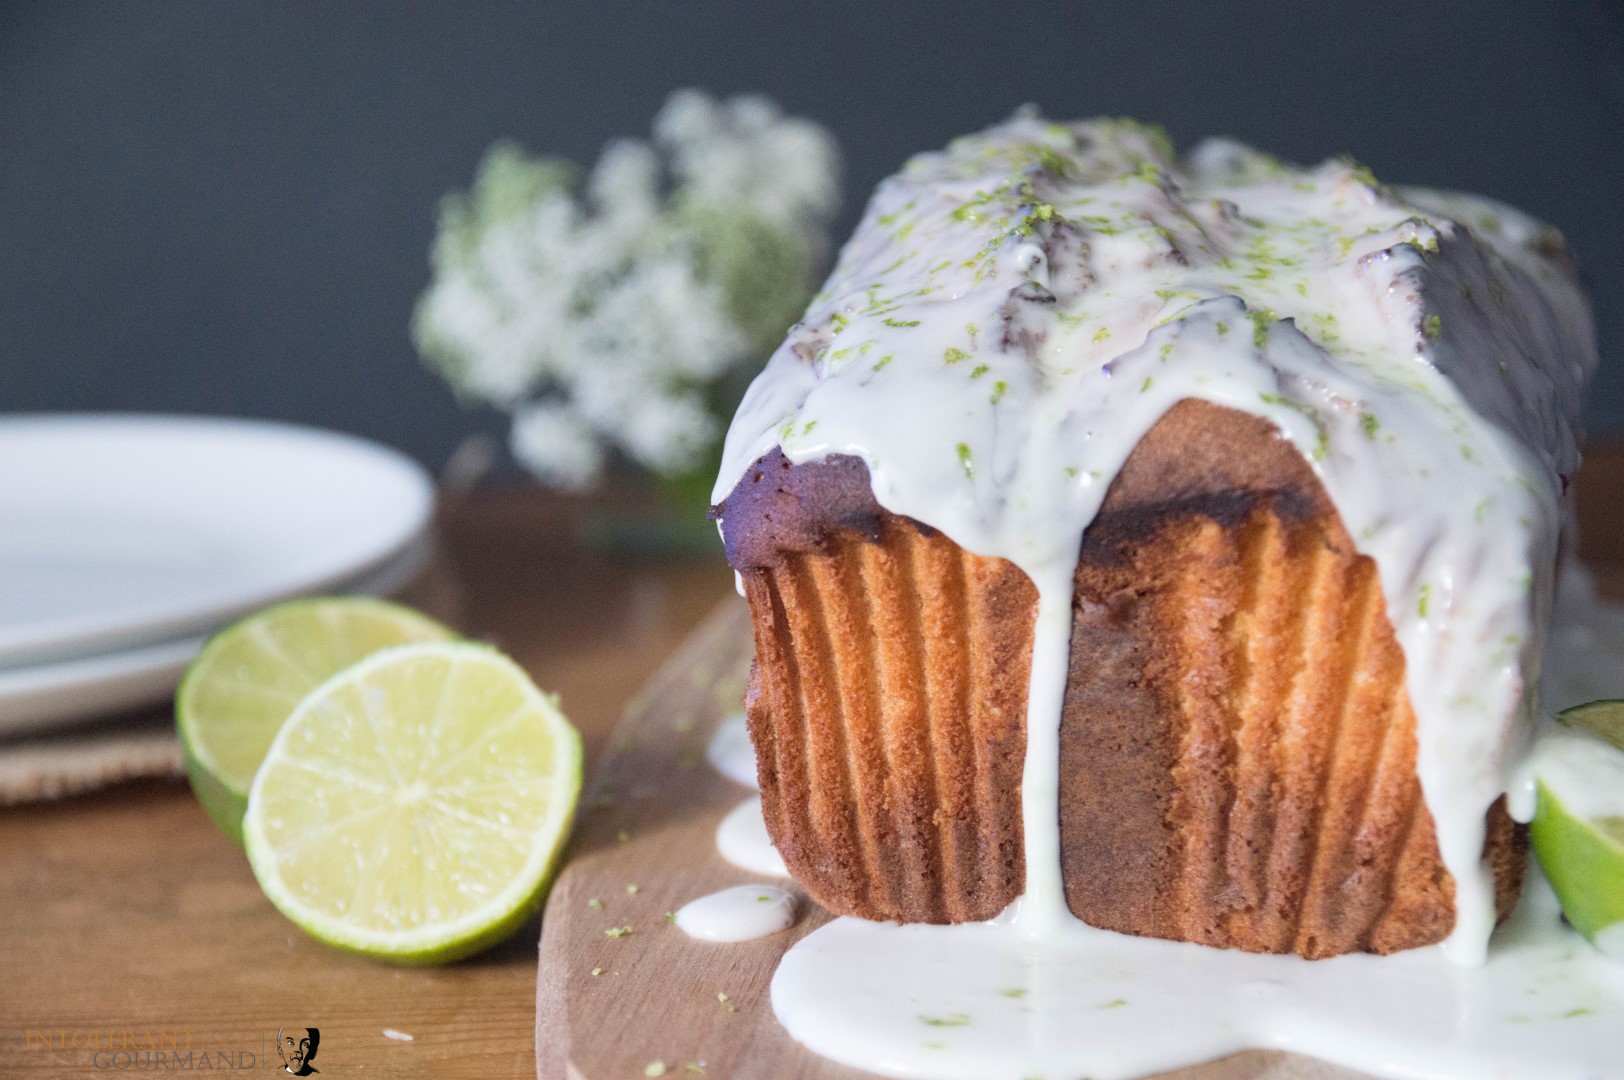 Gin and Tonic Cake - gluten-free, dairy-free and the perfect cake for any celebration! www.intolerantgourmand.com